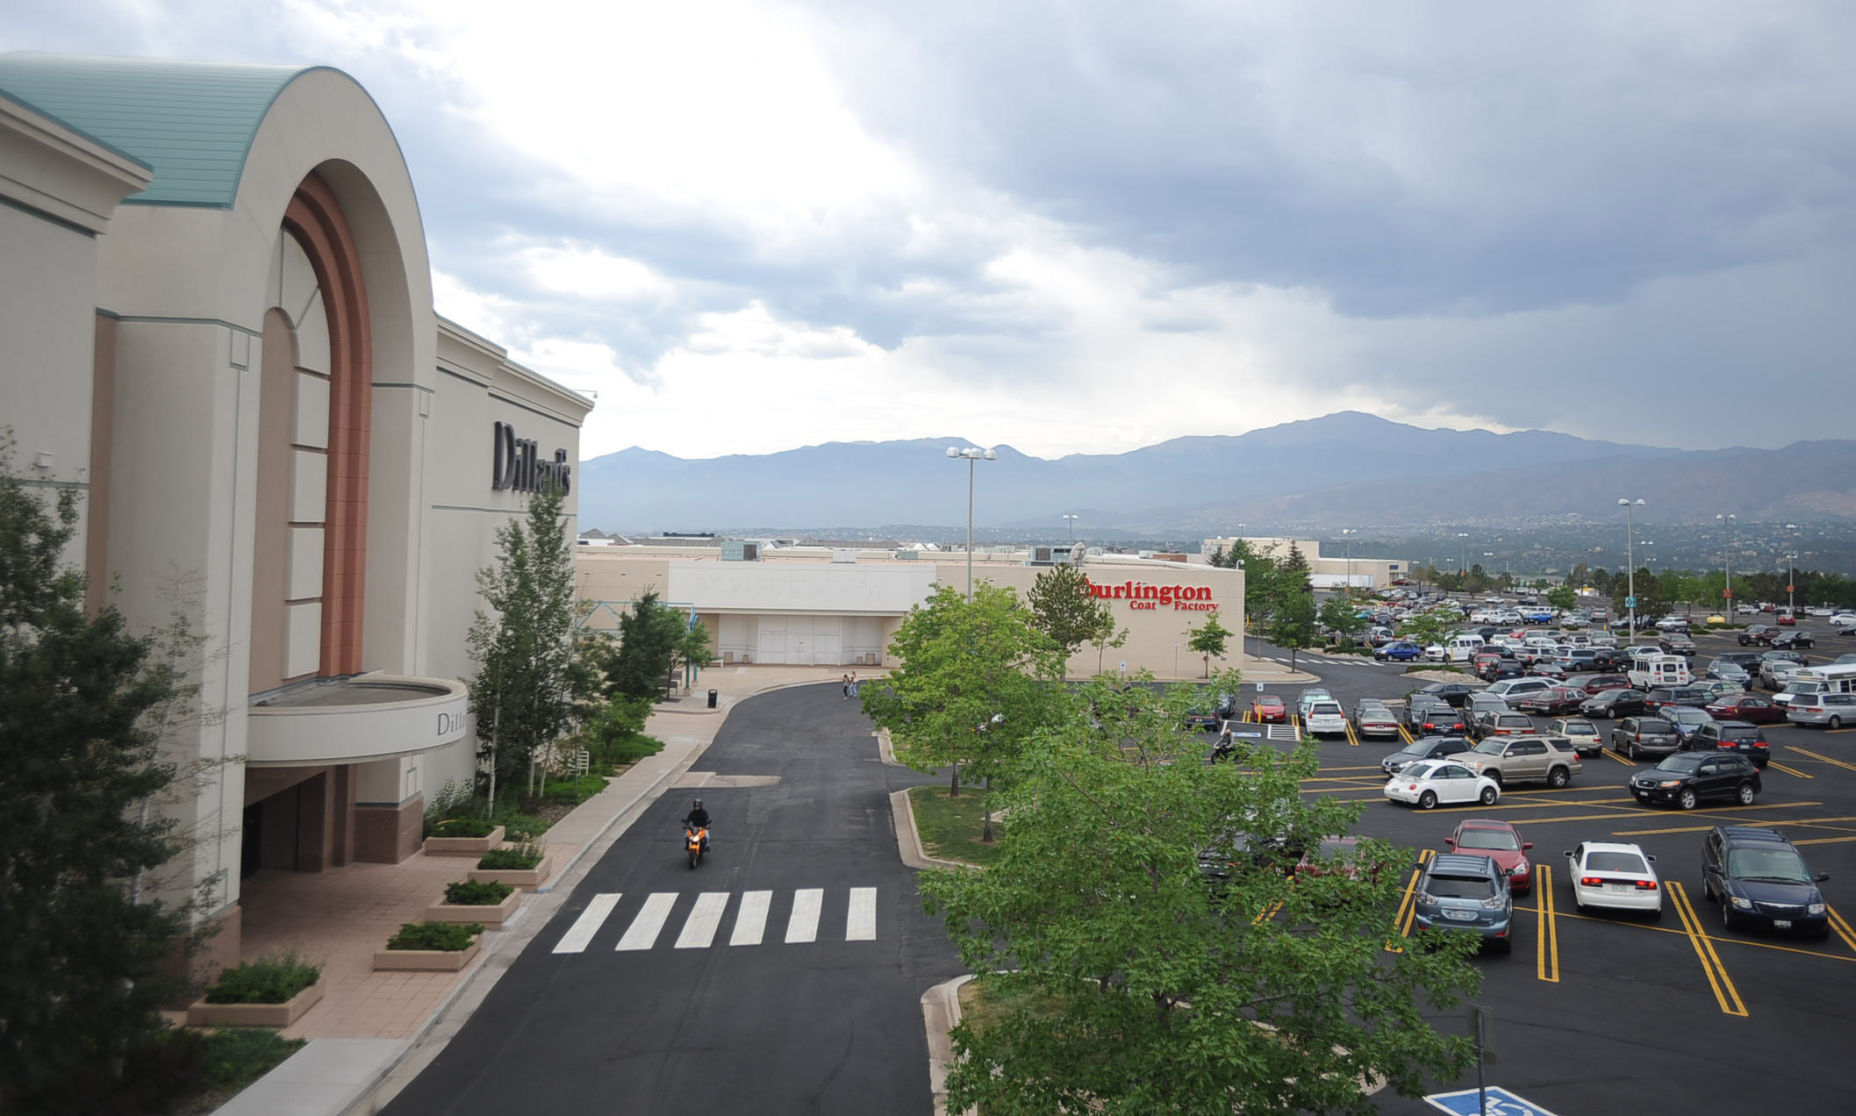 Tale of two Colorado Springs malls Chapel Hills, Citadel face challenges of changing tastes Business gazette